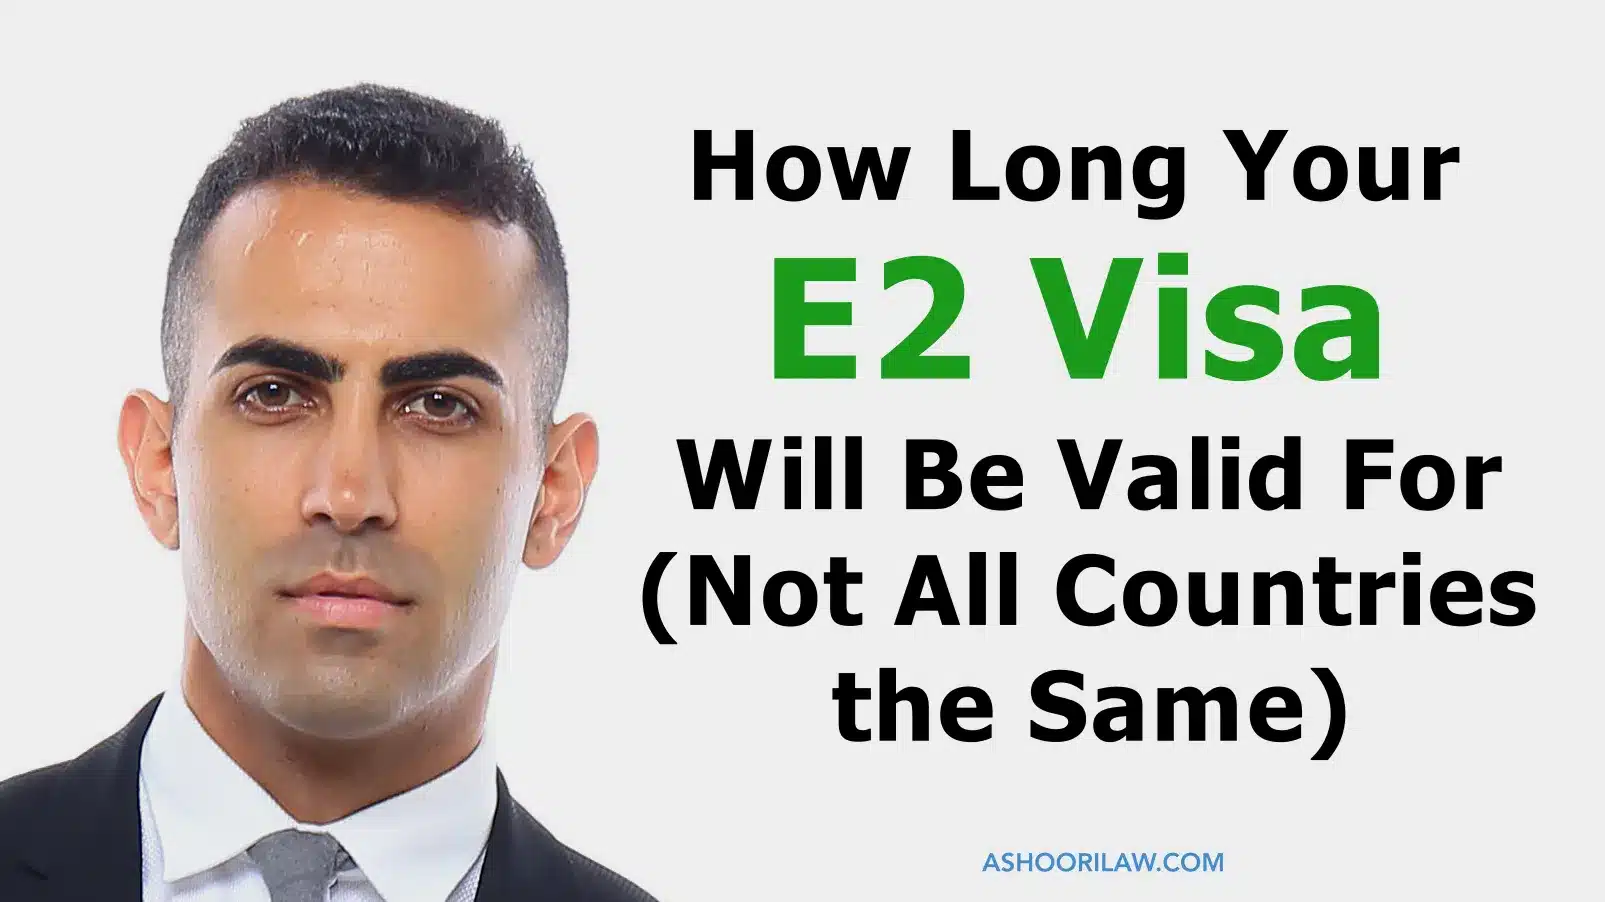 How Long Your E2 Visa Will Be Valid For